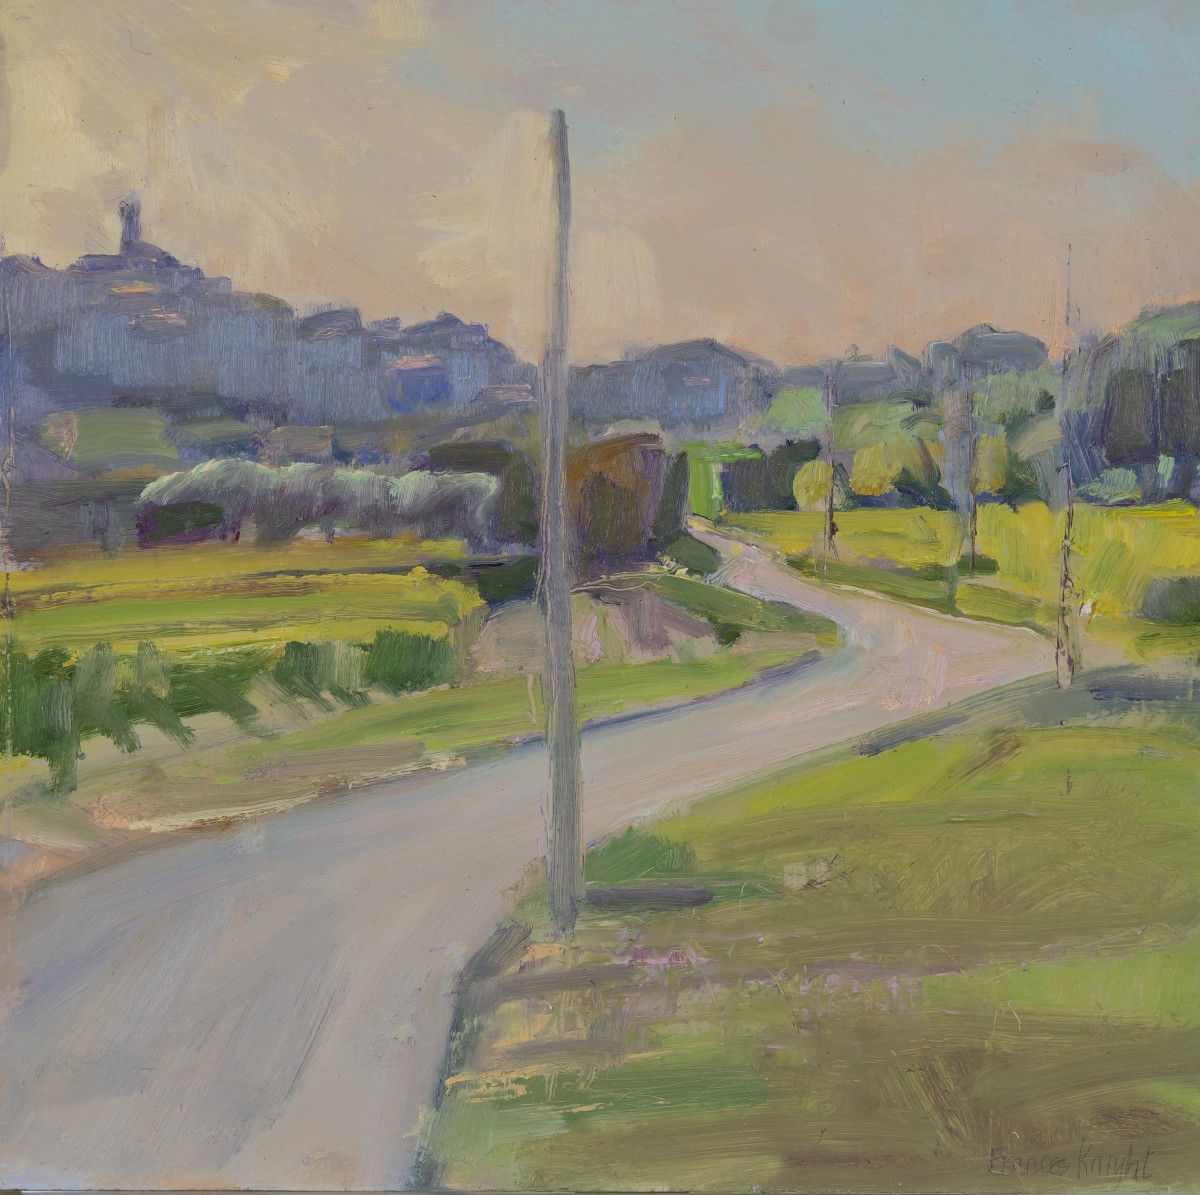 Caromb Road Afternoon Light by Frances Knight 